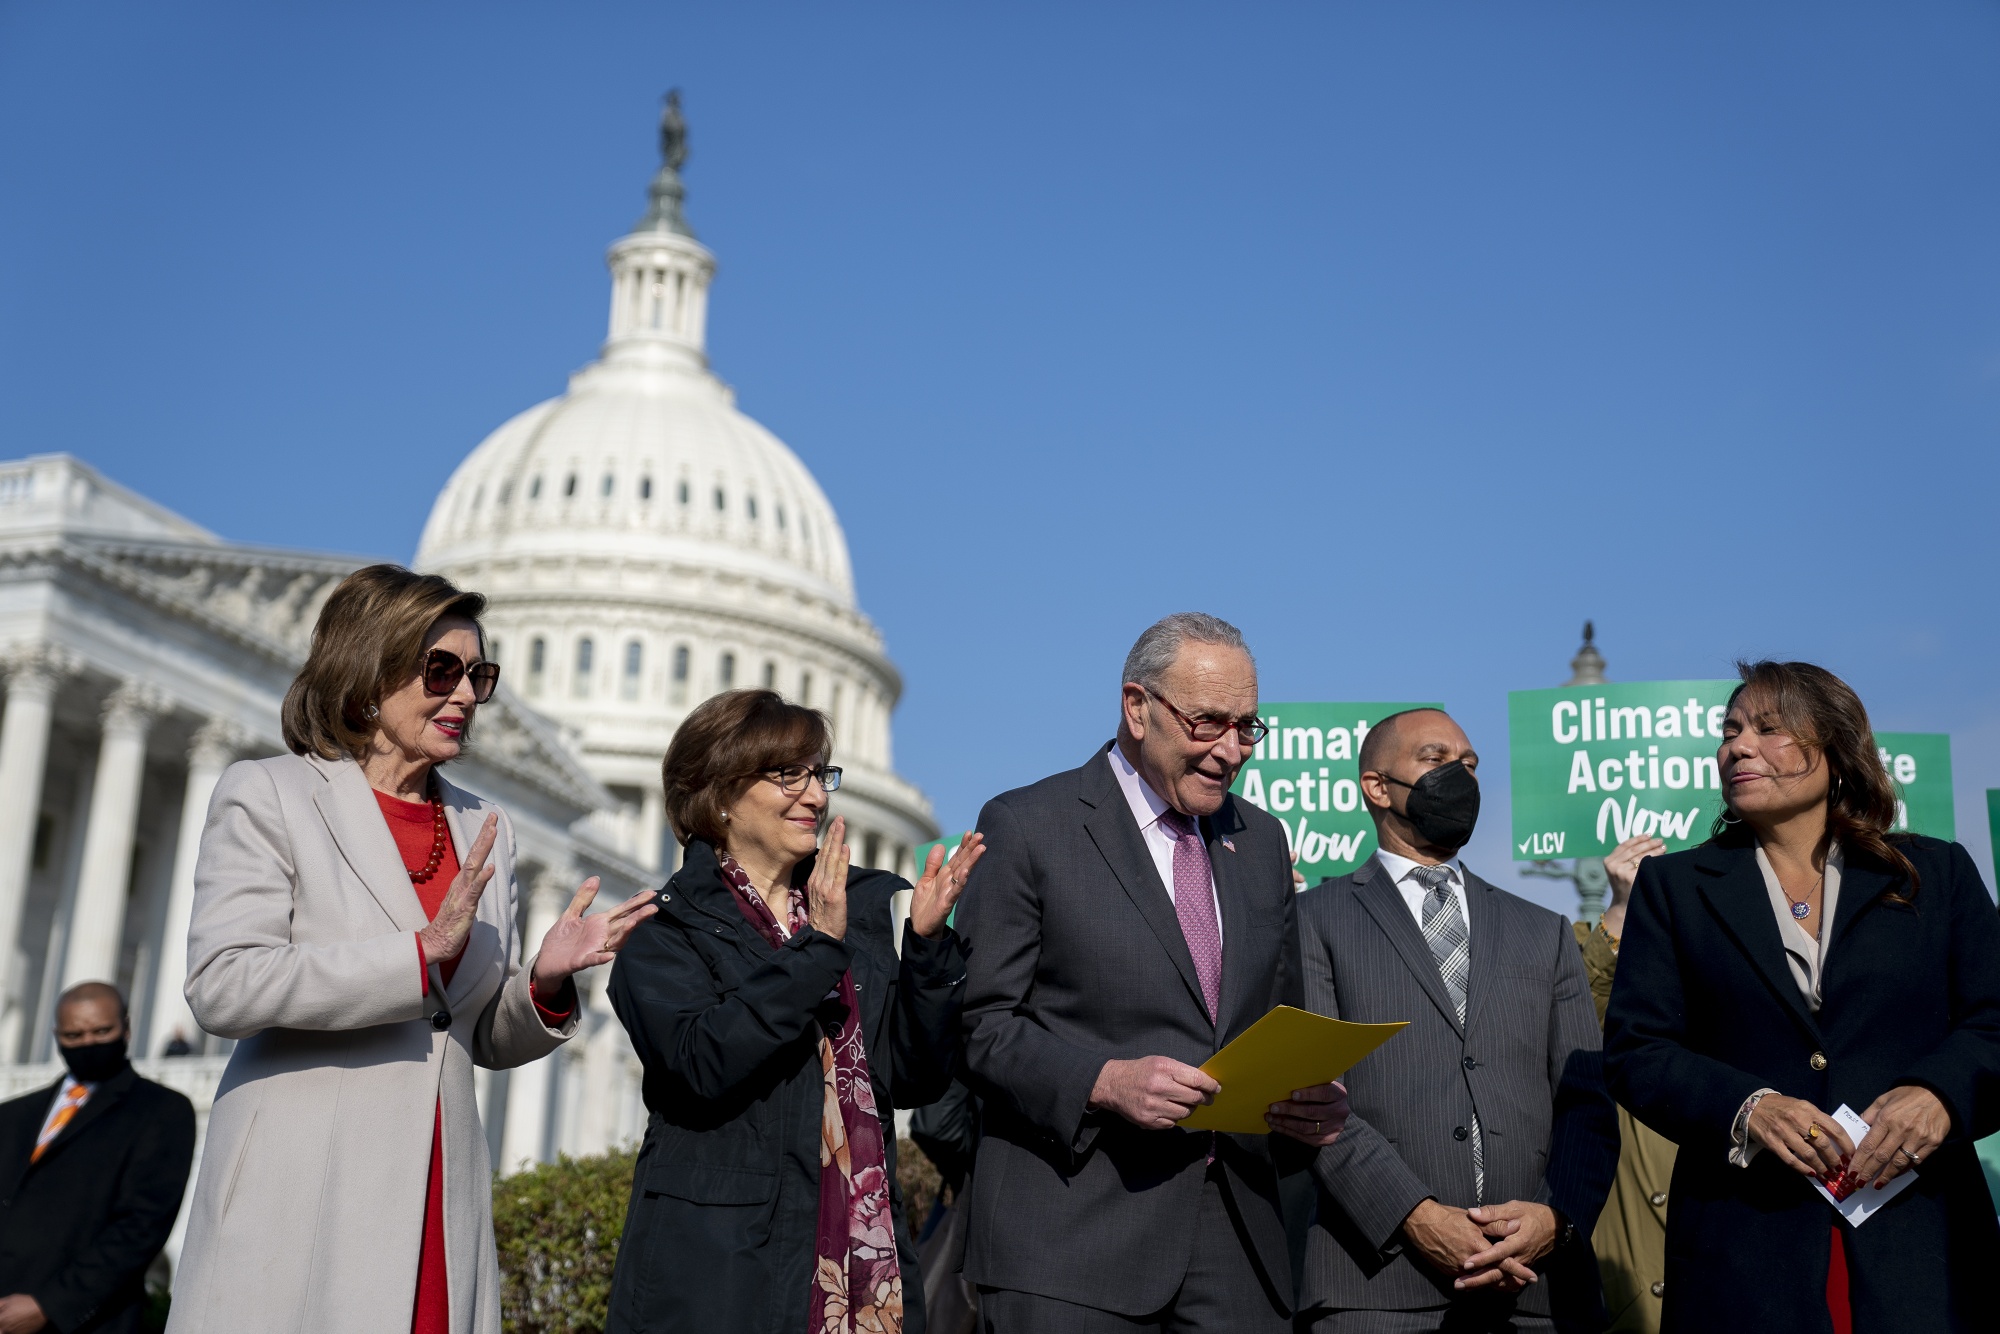 Senate Majority Leader Chuck Schumer, center,&nbsp;during a news conference on climate action outside the US Capitol in November 2021.